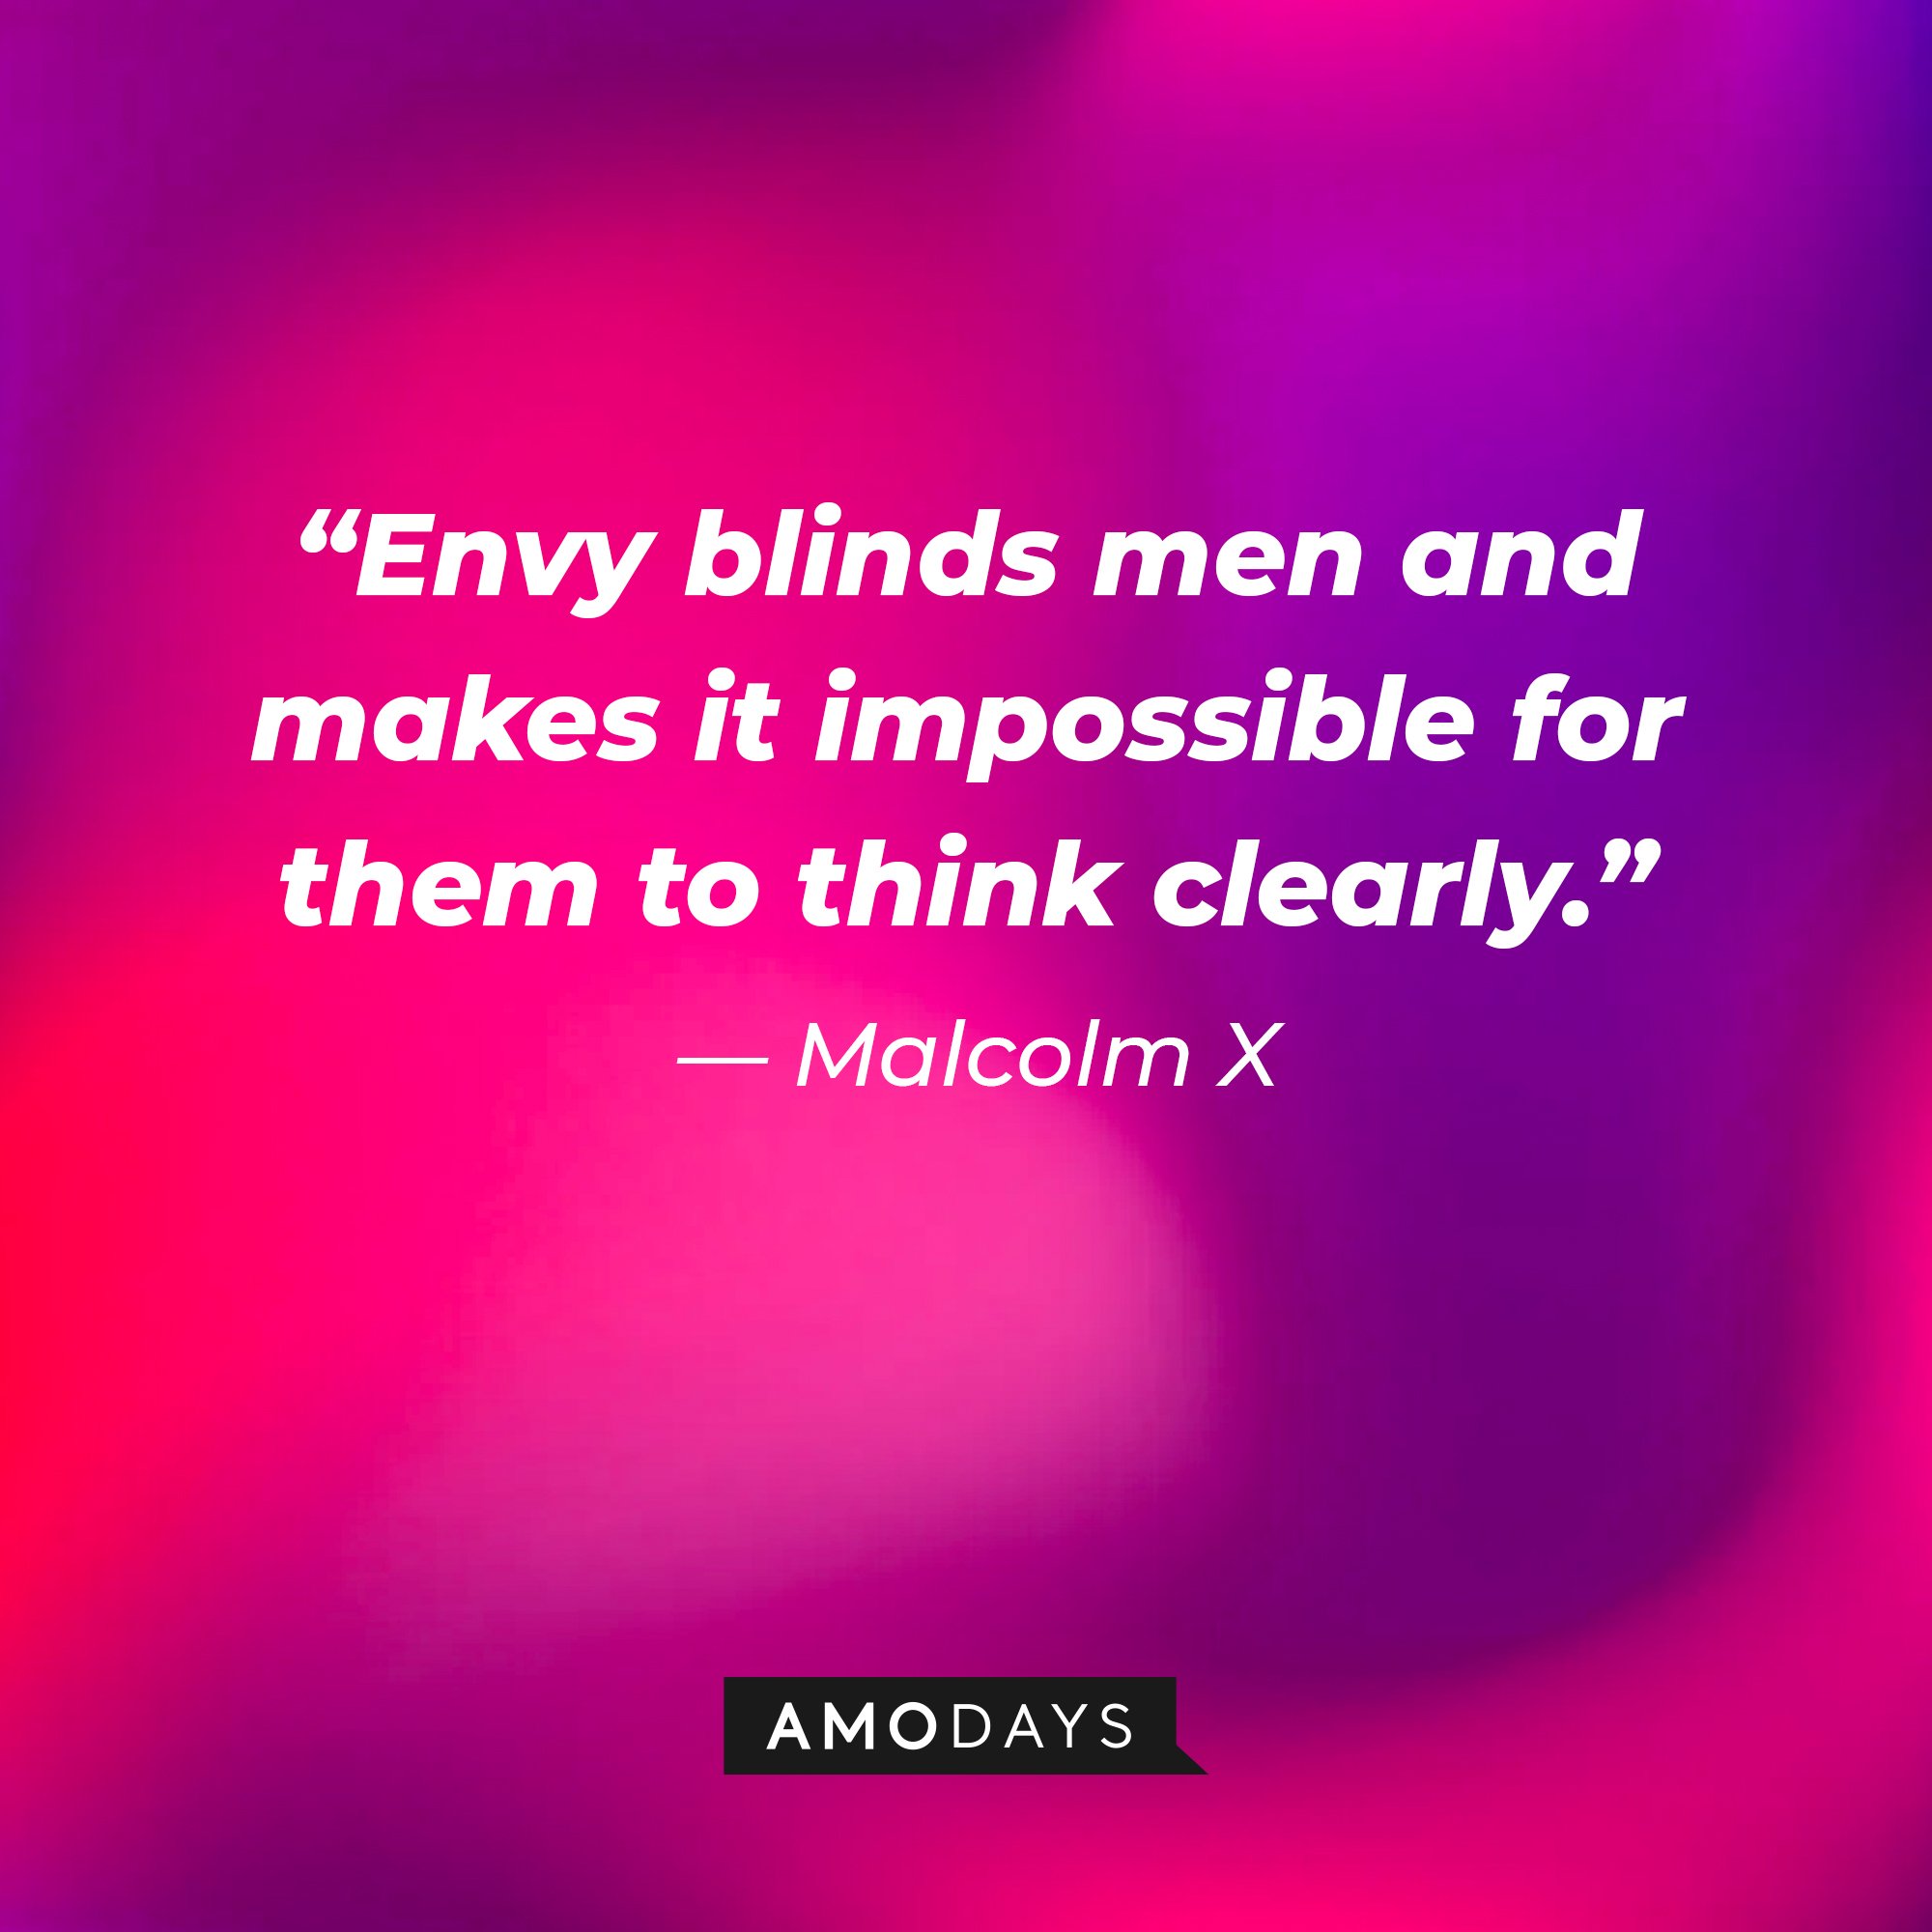  Malcolm X's quote: “Envy blinds men and makes it impossible for them to think clearly.” | Image: AmoDays